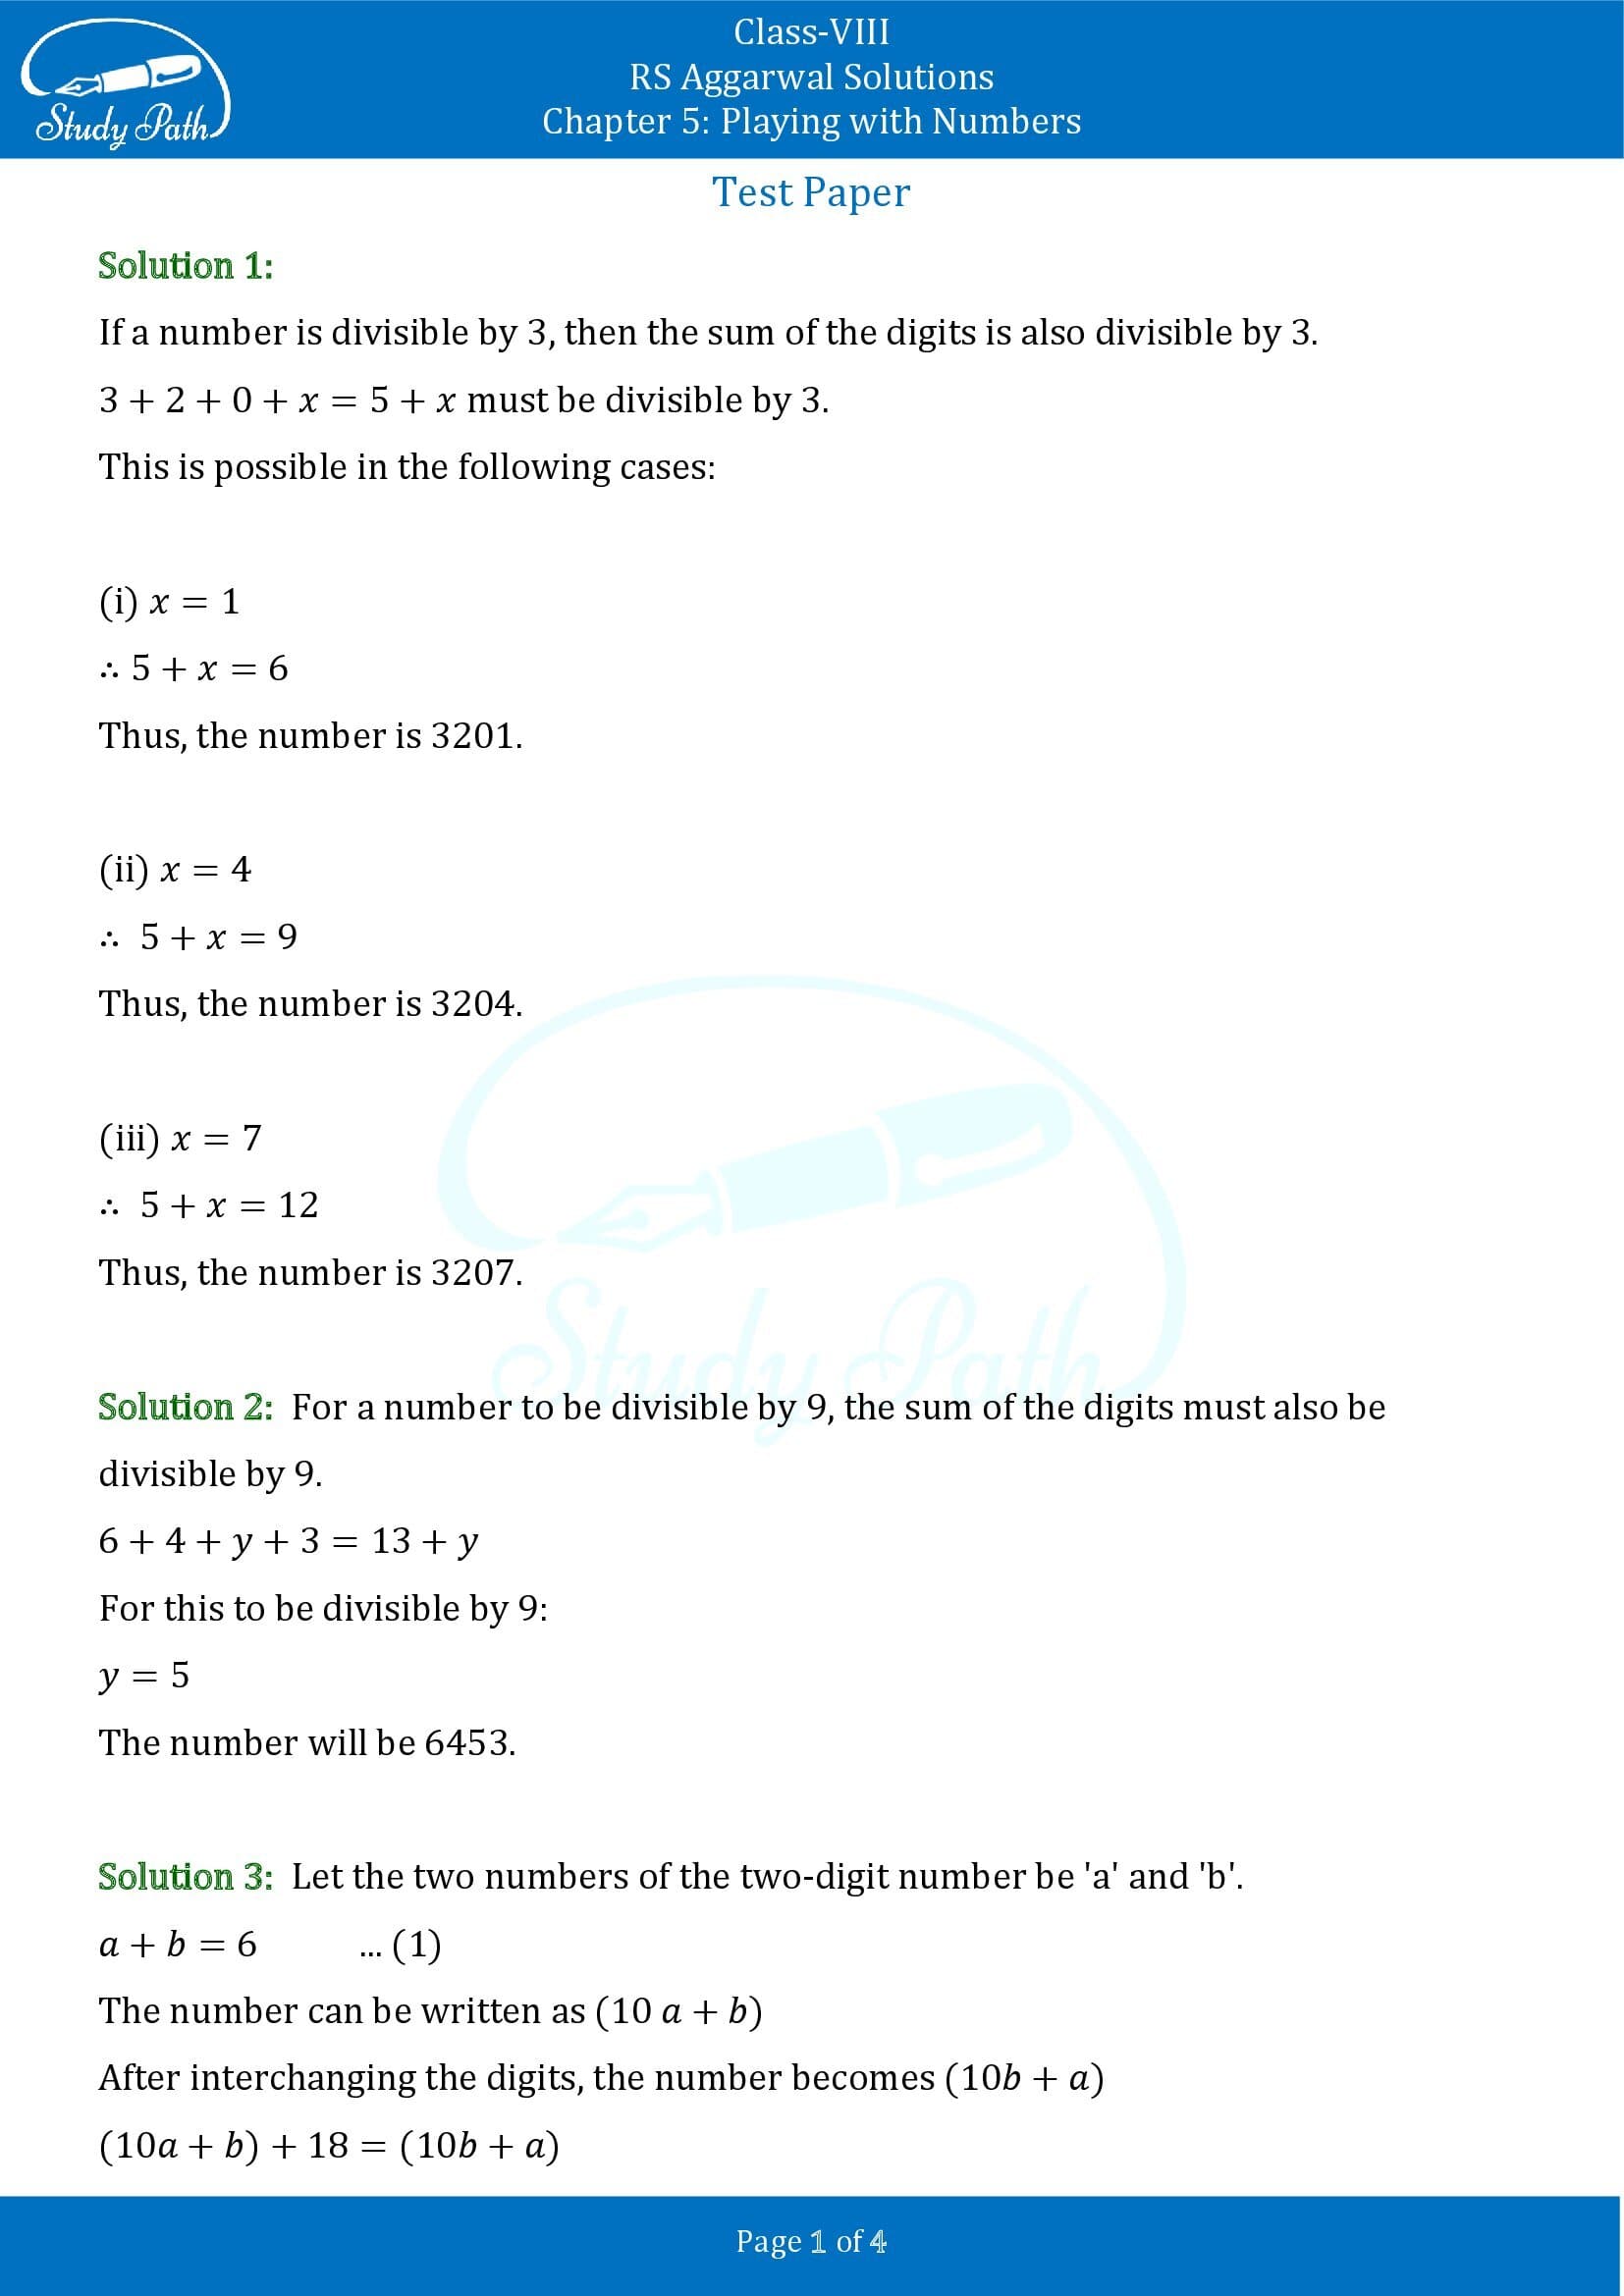 RS Aggarwal Solutions Class 8 Chapter 5 Playing with Numbers Test Paper 00001